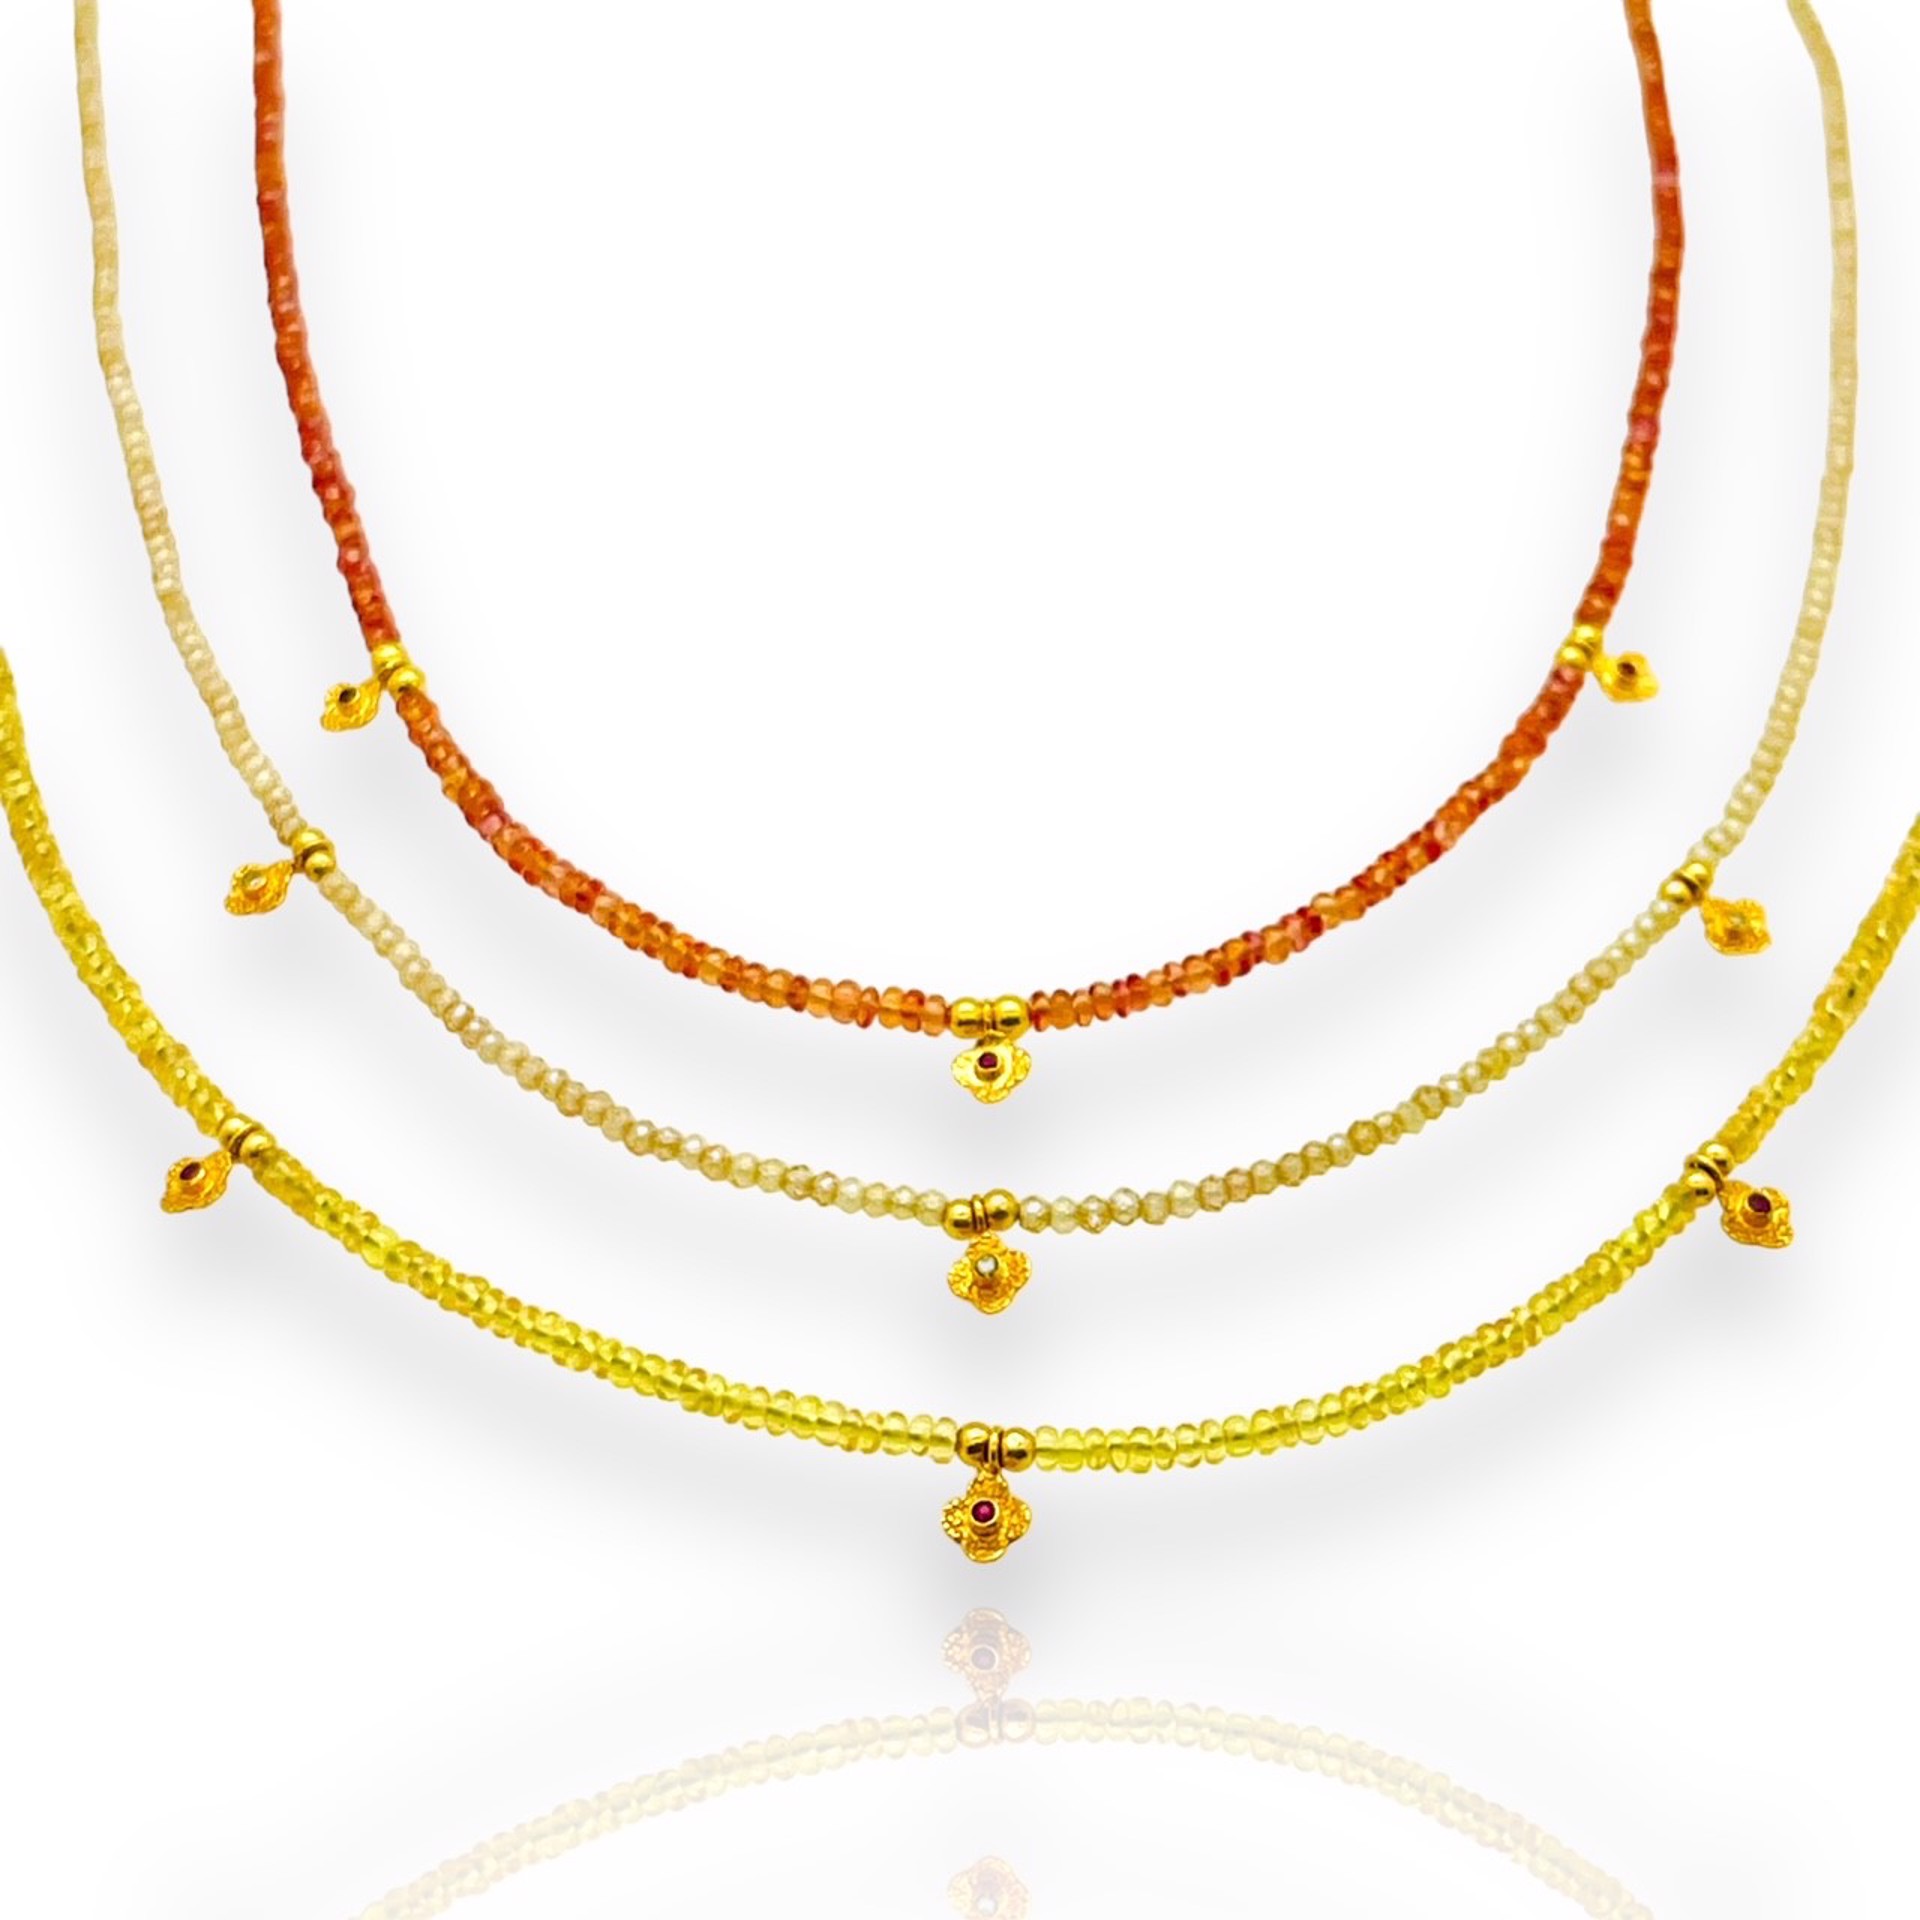 Petal Orange Sapphires Necklaces, 18k gold 16" by Mara Labell